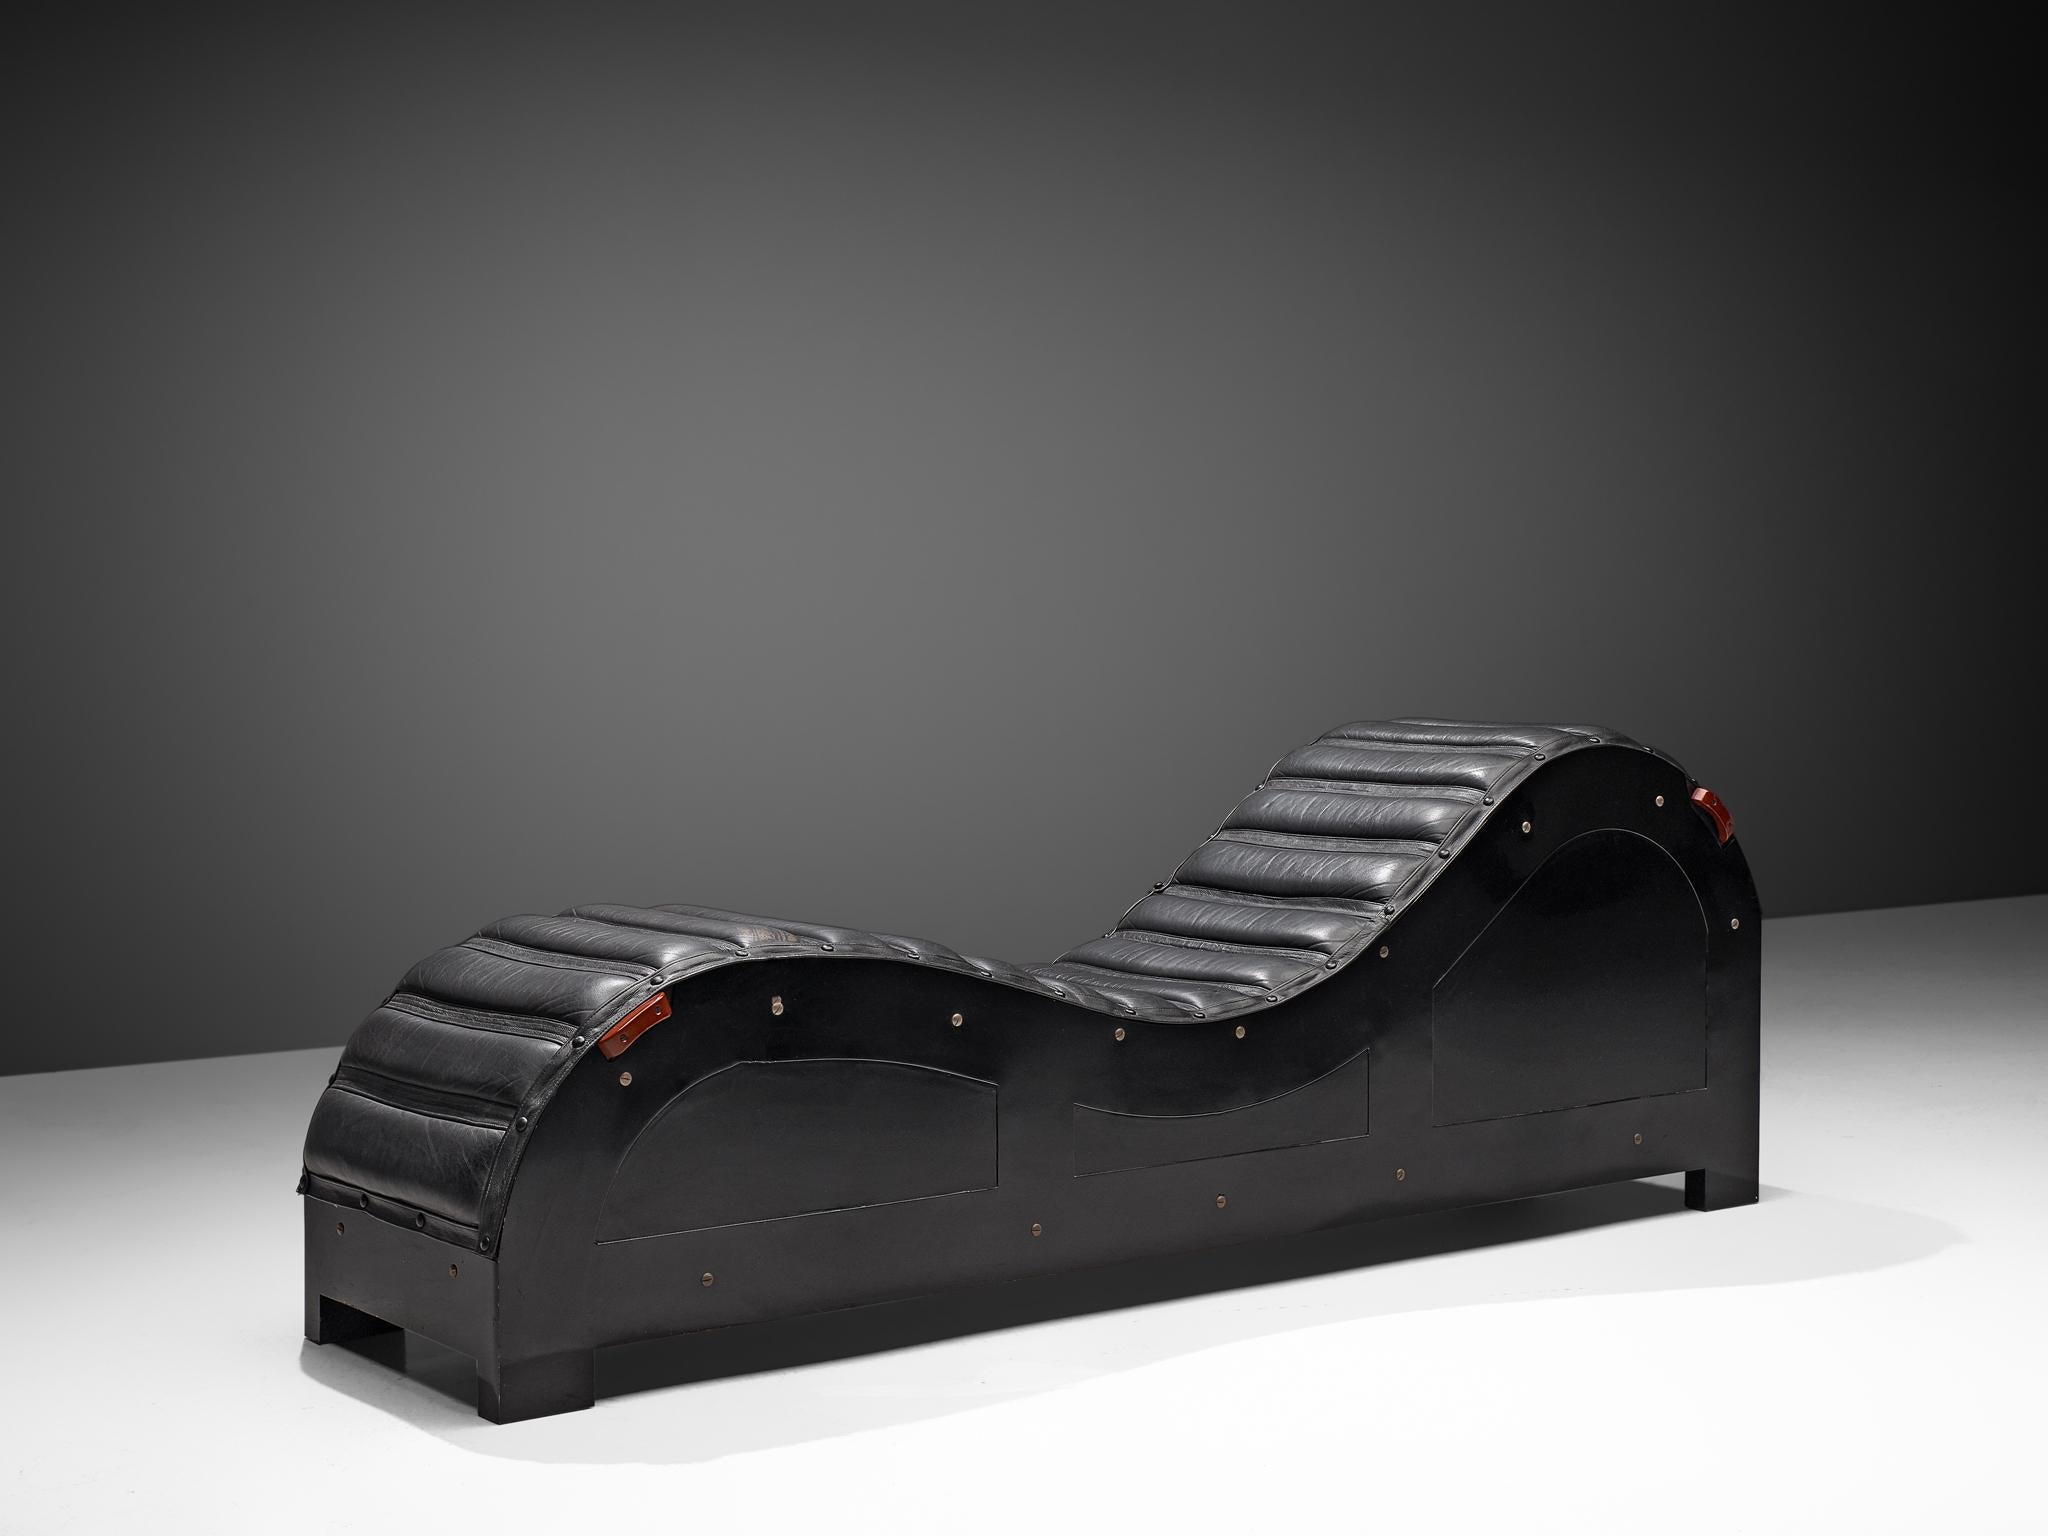 Mats Theselius for Källemo, daybed, in steel and leather, Sweden 1992.

Limited edition daybed. This chaise was designed by Mats Theselius. It consist of a steel frame with car-enamel finish in black. The seating is covered with black leather.